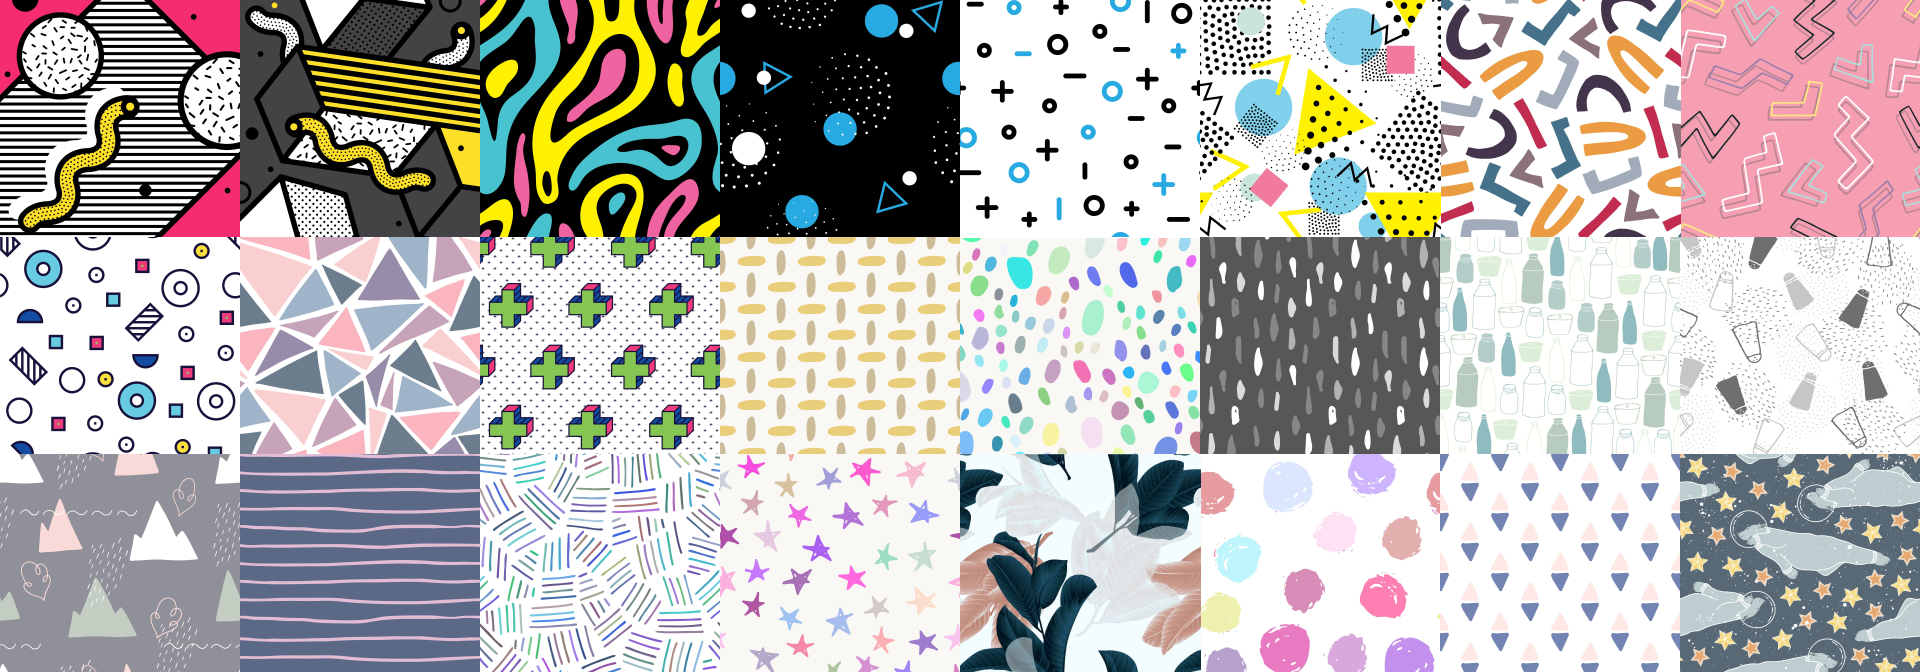 Various vector pattern backgrounds that can be used to replace single color backgrounds in videos